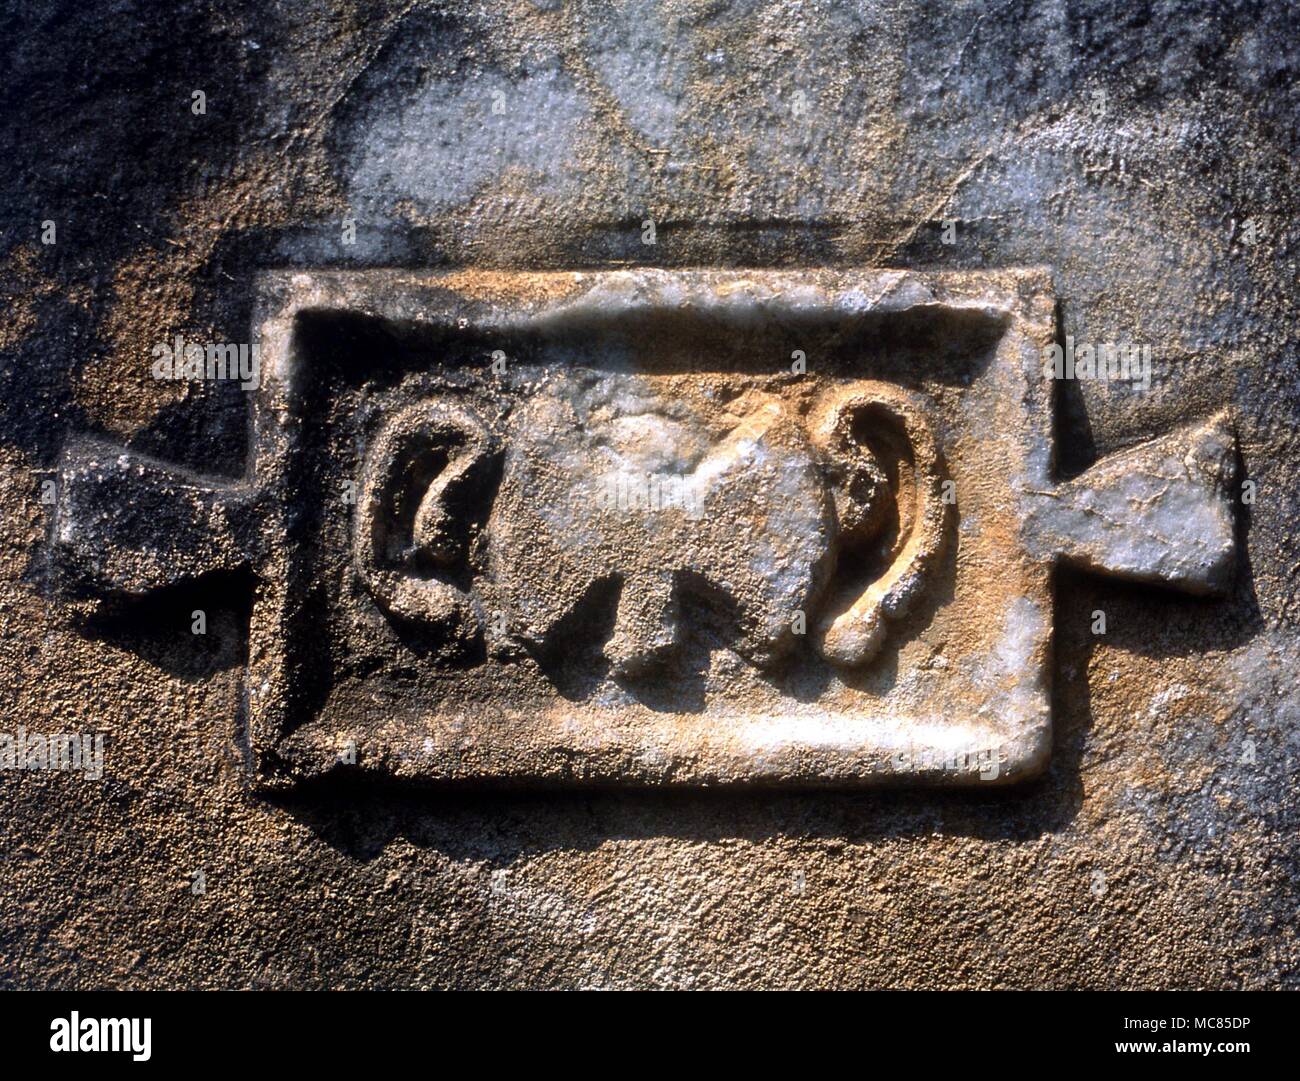 A sacred initiation symbol, of serpents in the form of ears, on either side of the Mycenean hammer-head symbol. Bas relief on the walls of the ancient Greek temple at Europas, Turkey. Stock Photo